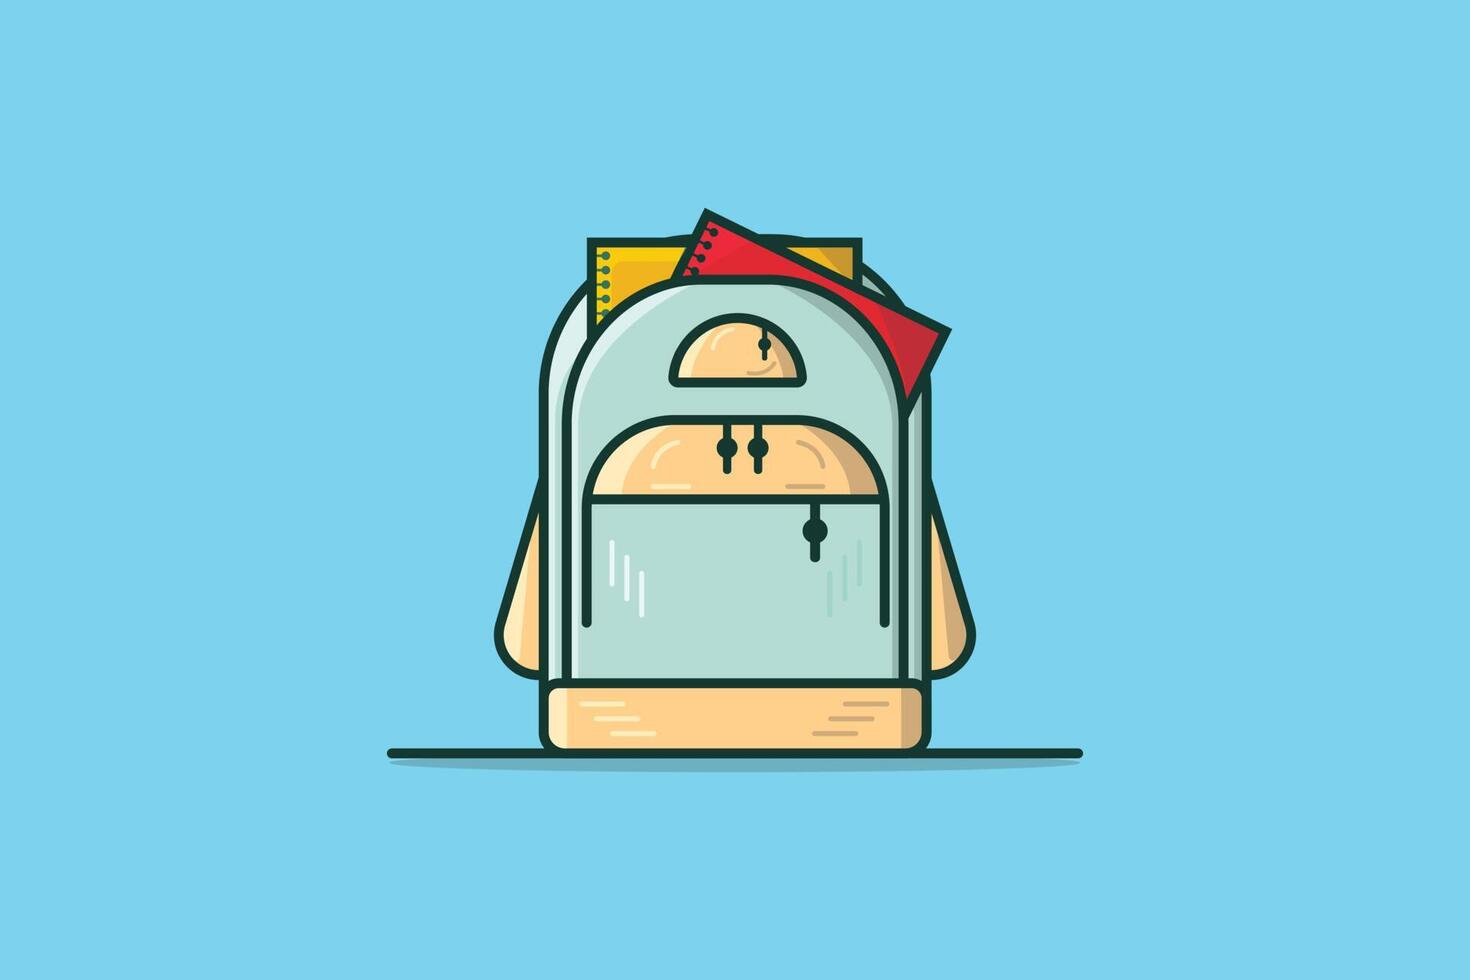 Open Bag Backpack with Books vector illustration. Education and Travel object icon concept. School bag backpack, Back to school and education concept vector design with shadow on blue background.